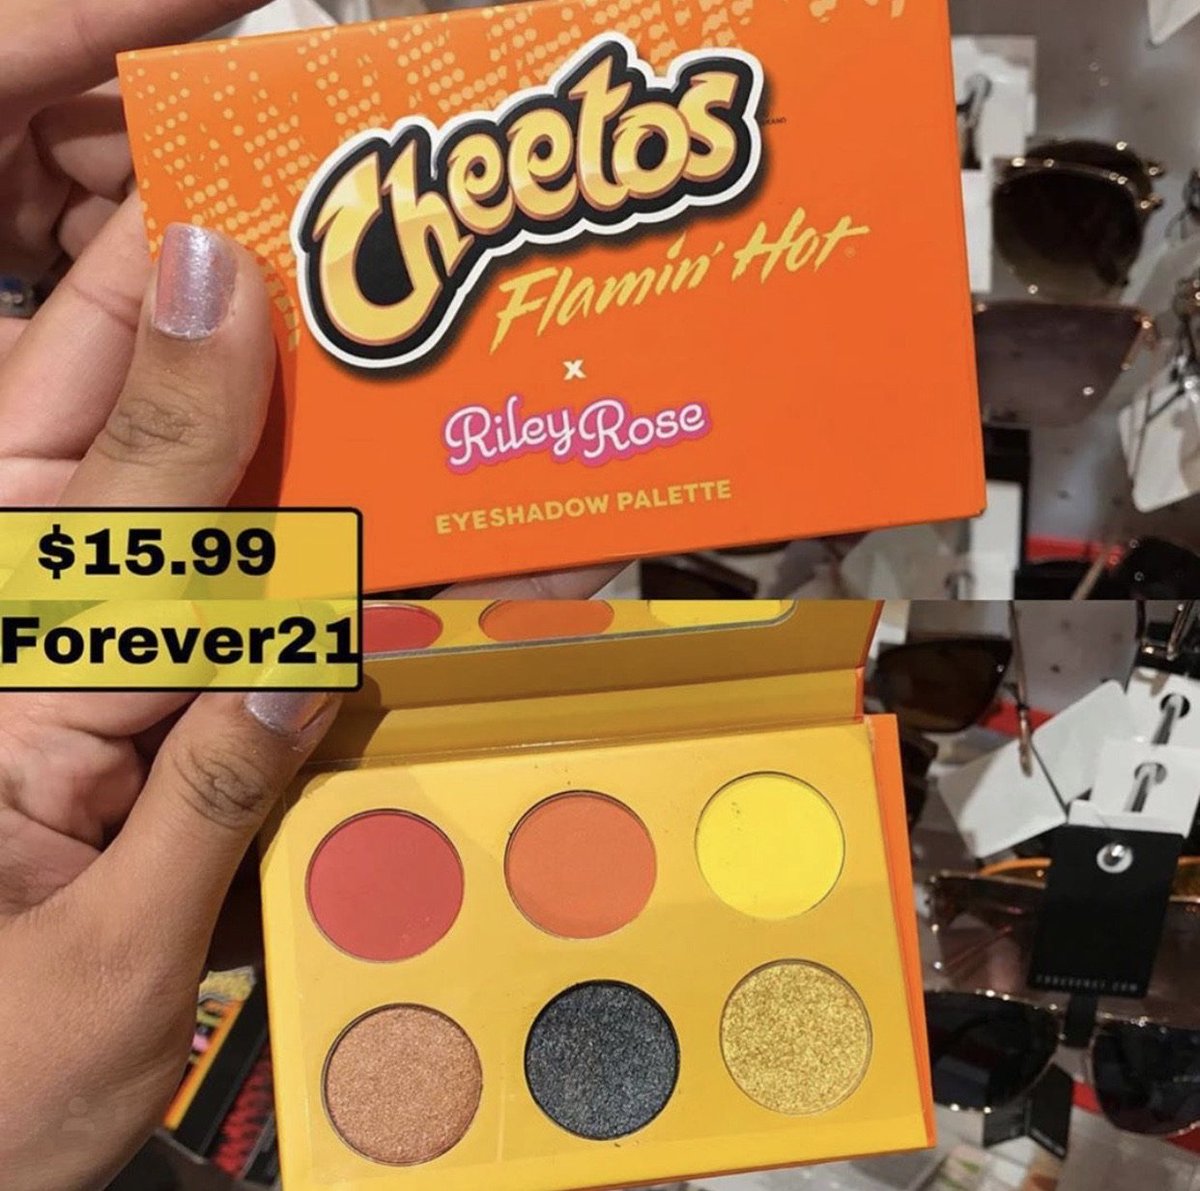 Do we need a Jeffree Star review on the new Cheetos makeup collection?? 